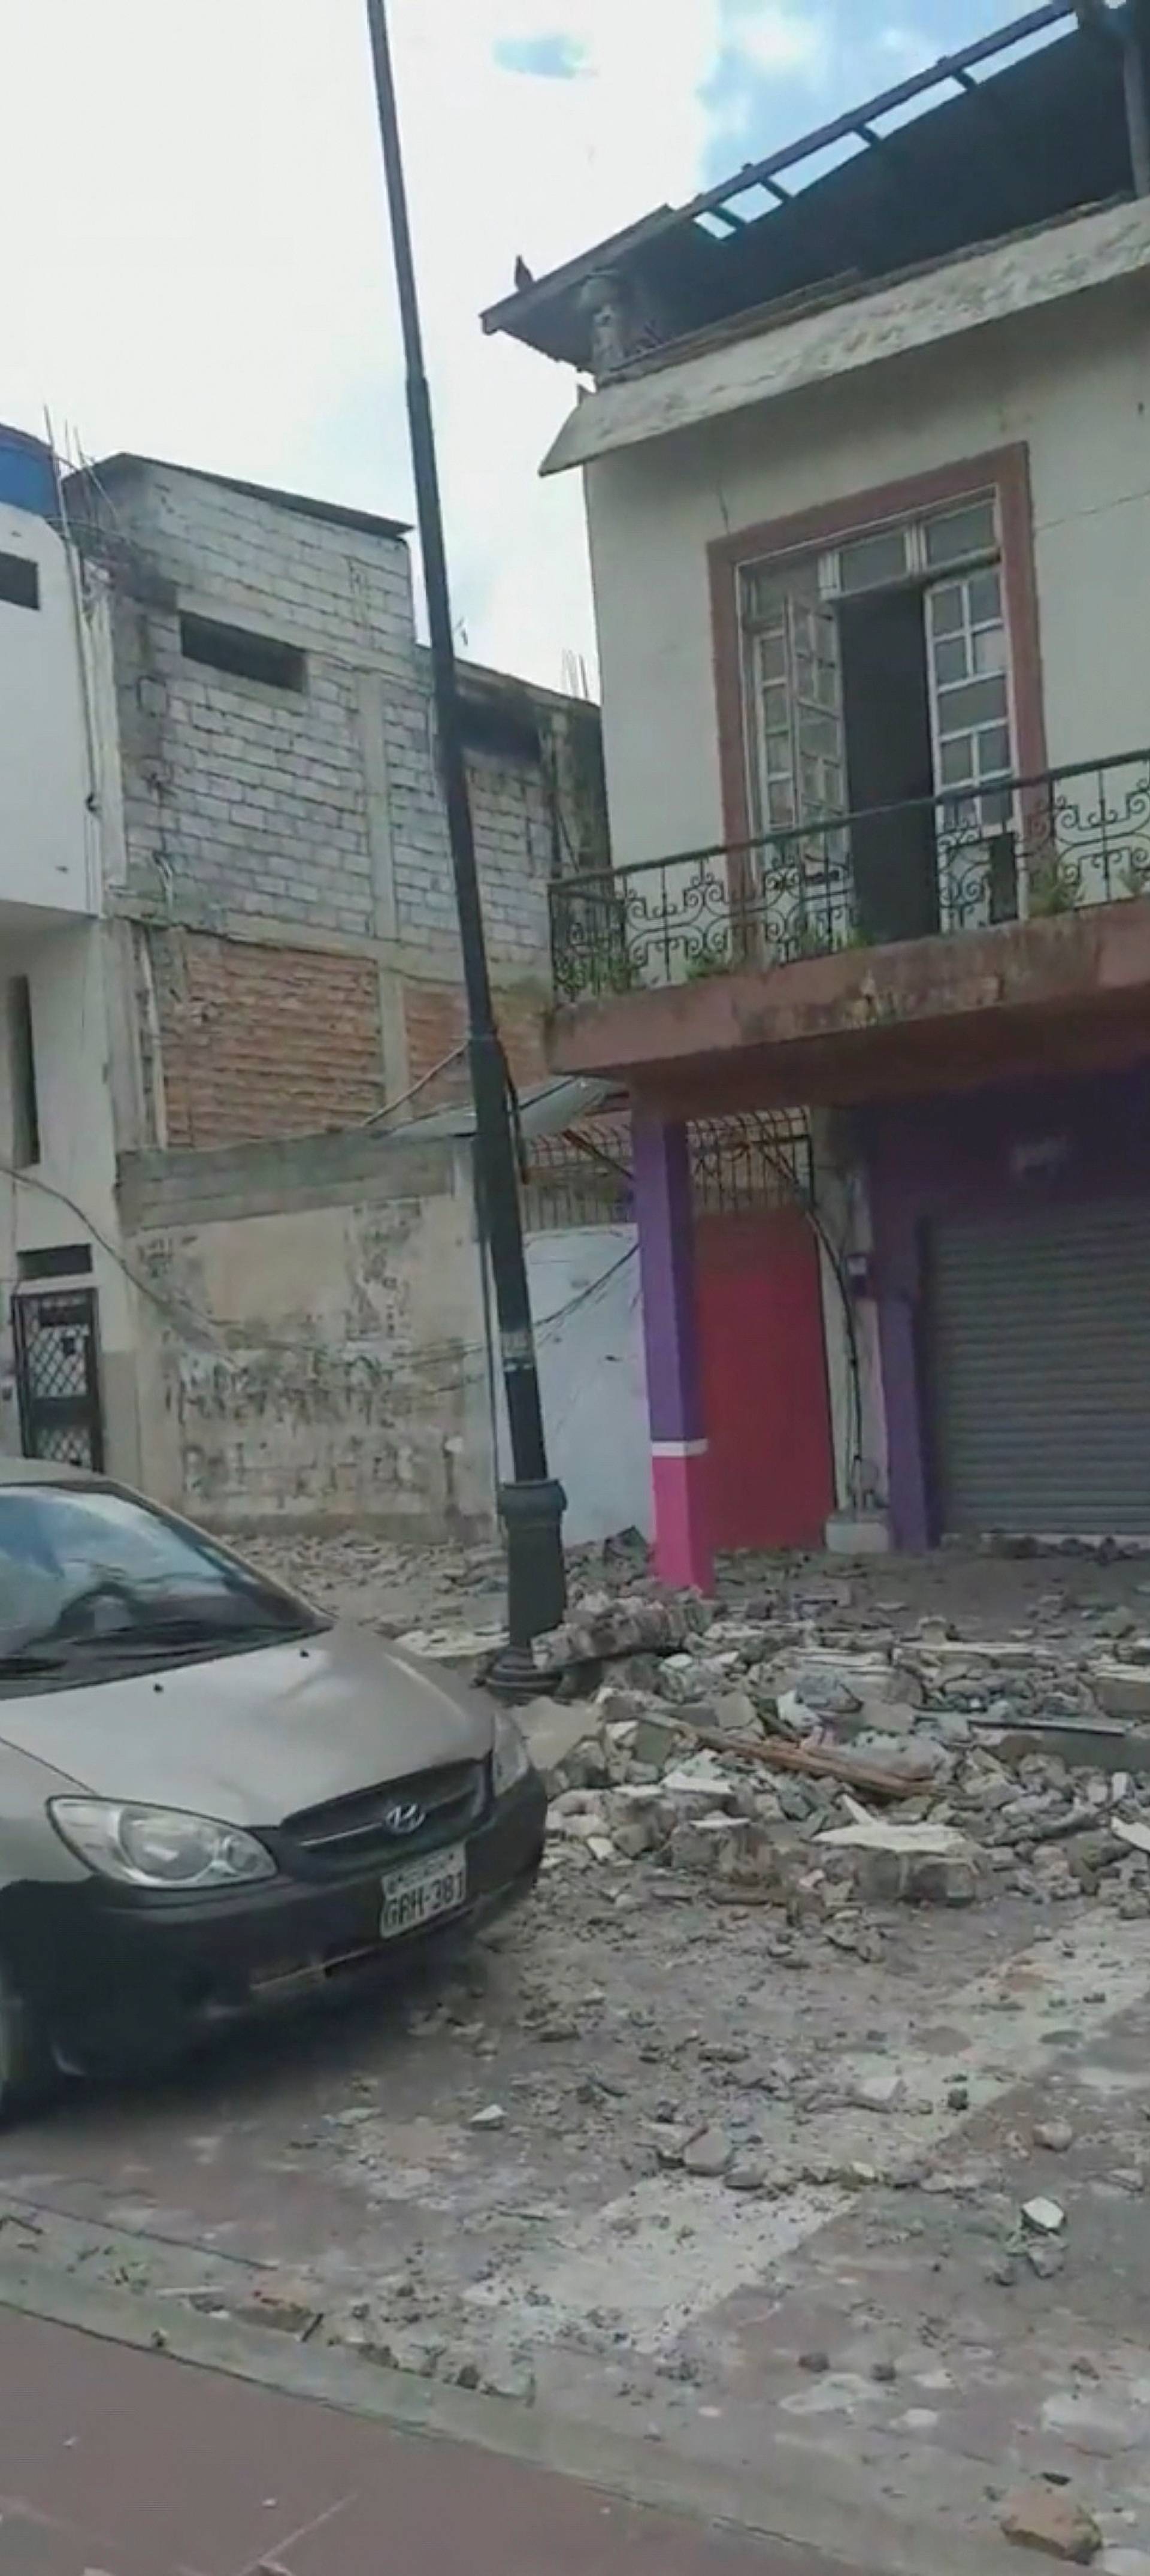 Aftermath of an earthquake in Pasaje